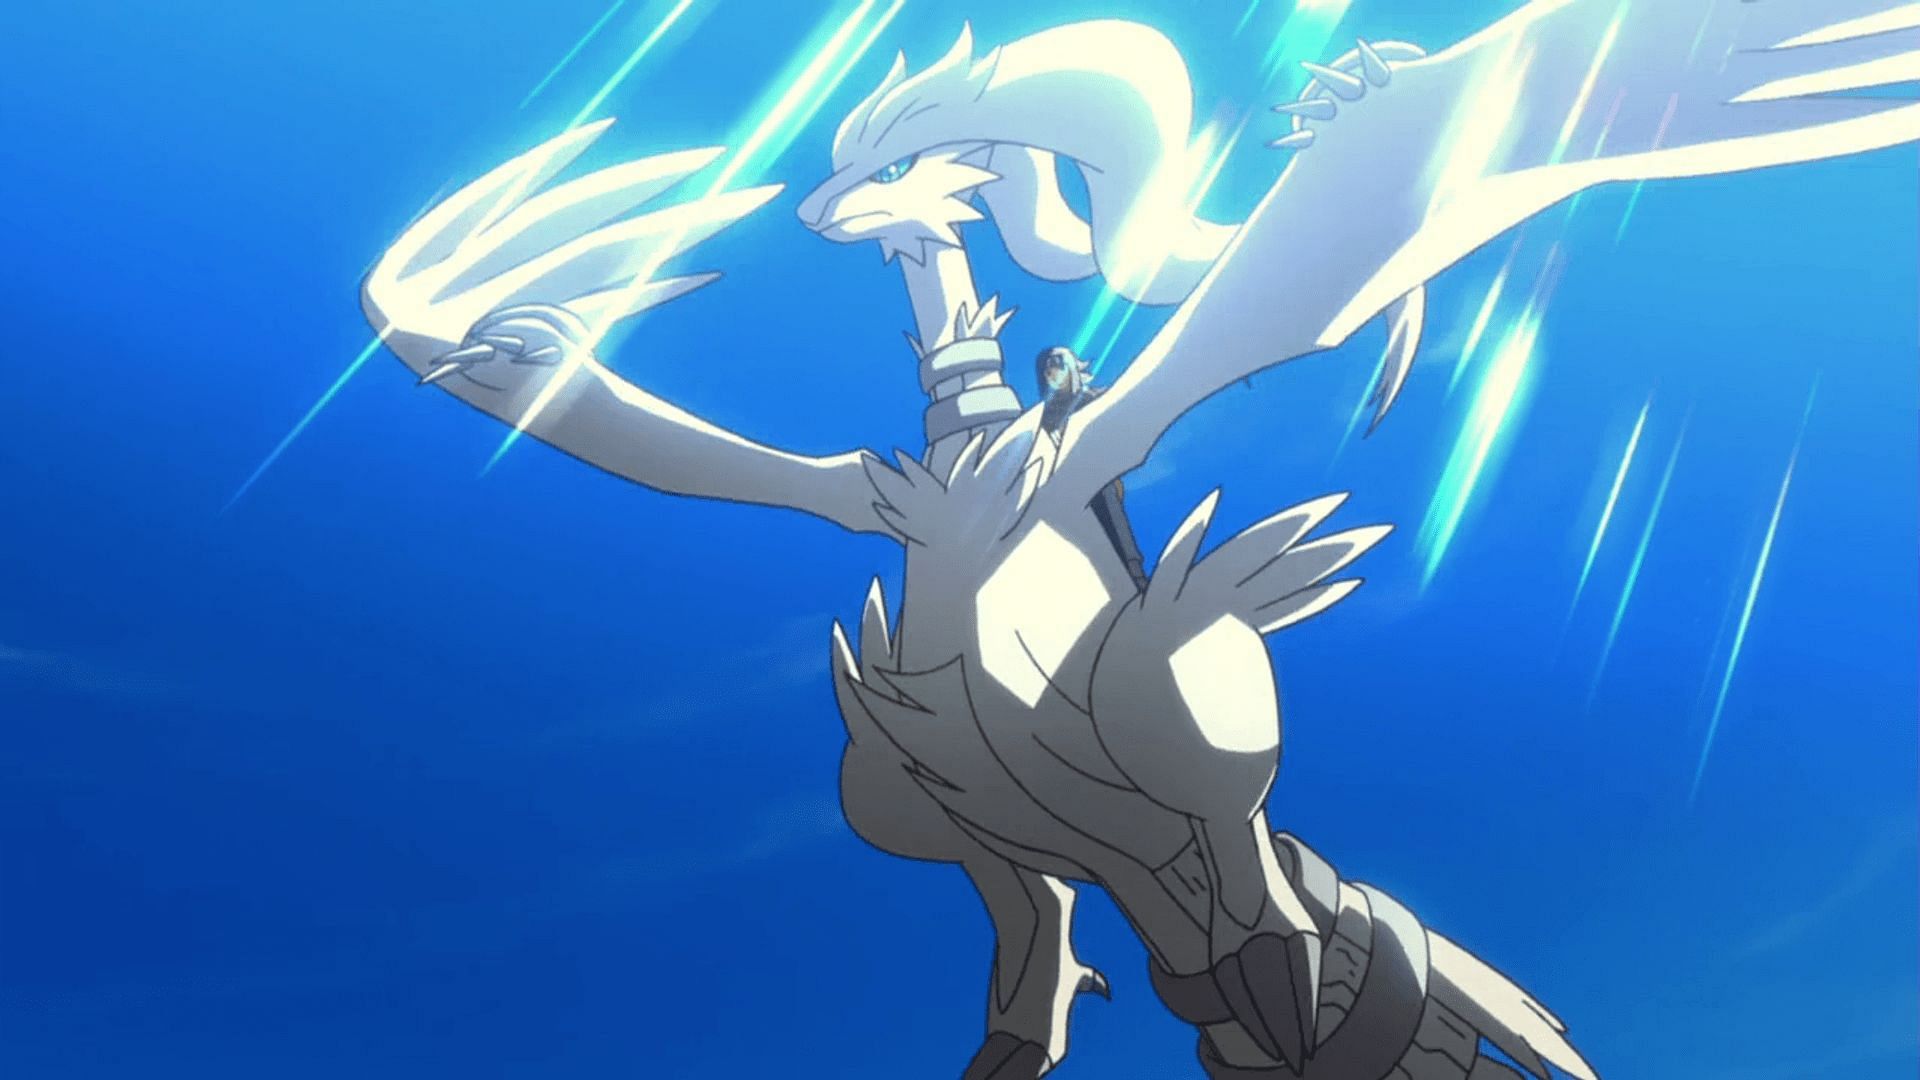 Reshiram as it appears in the movie (Image via The Pokemon Company)